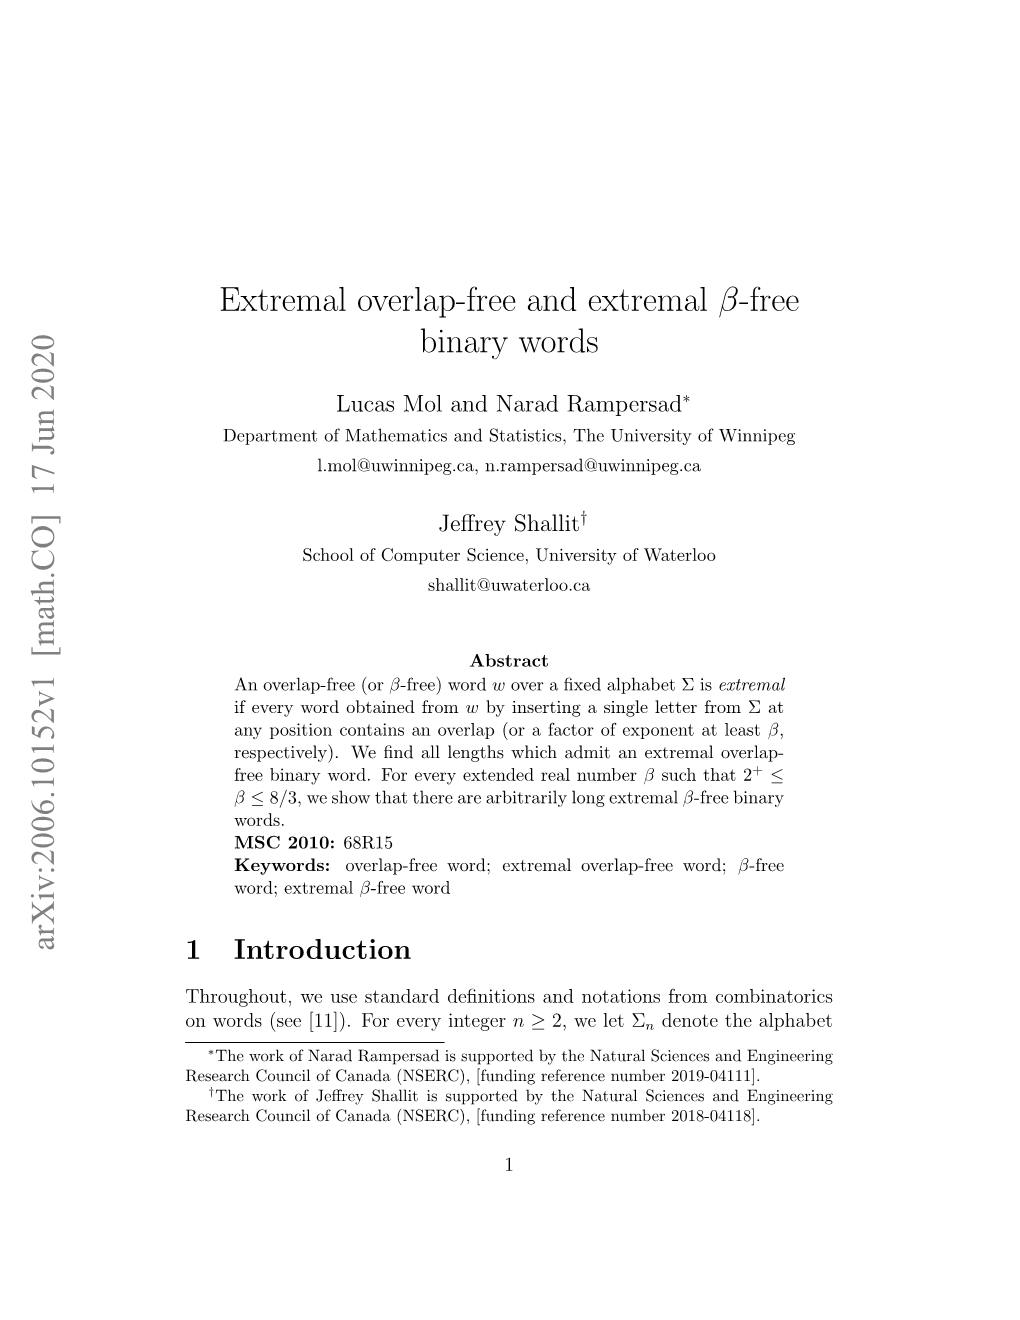 Extremal Overlap-Free and Extremal Β-Free Binary Words Arxiv